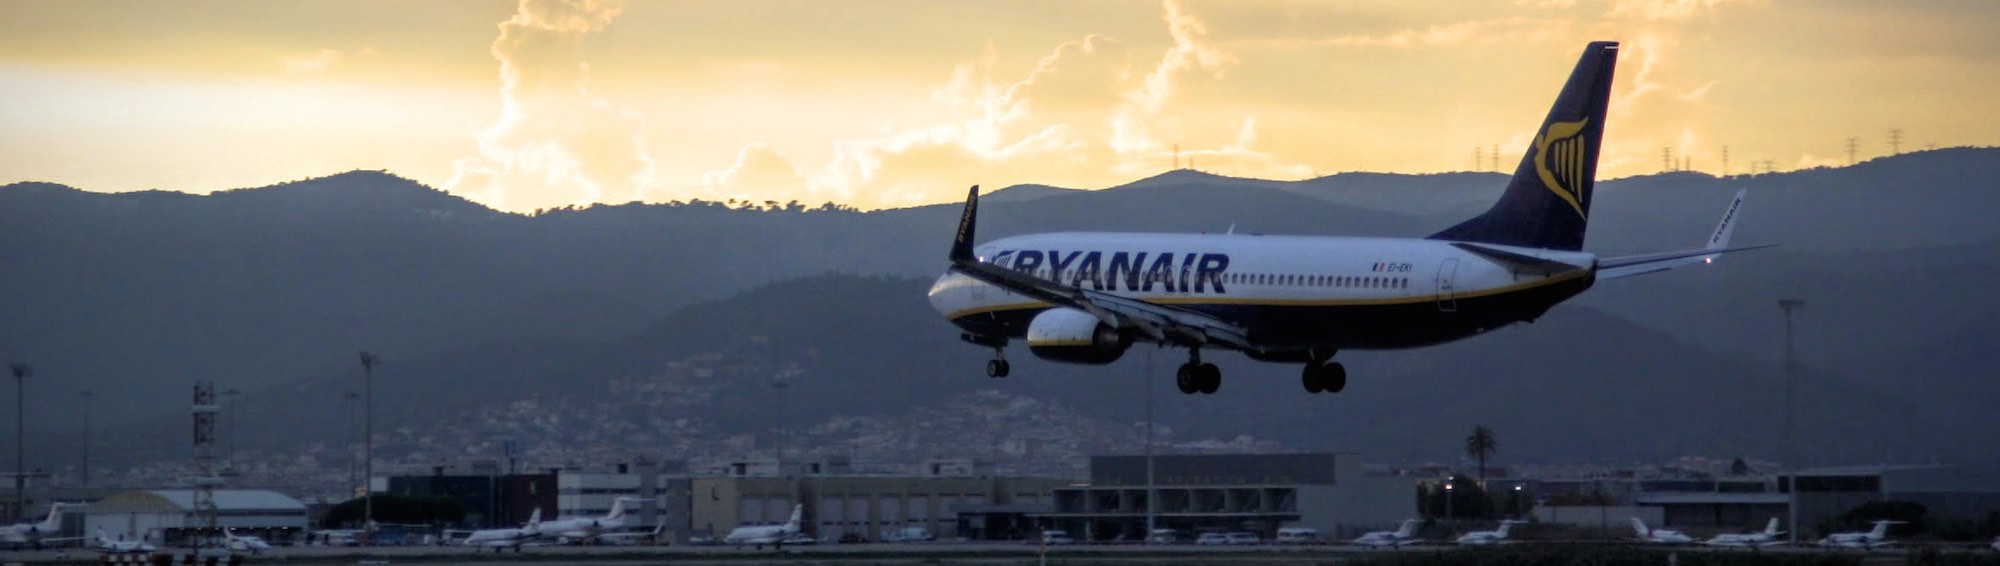 Best time to book flights for Helsinki (HEL) to Dubrovnik (DBV) flights with Ryanair at AirHint